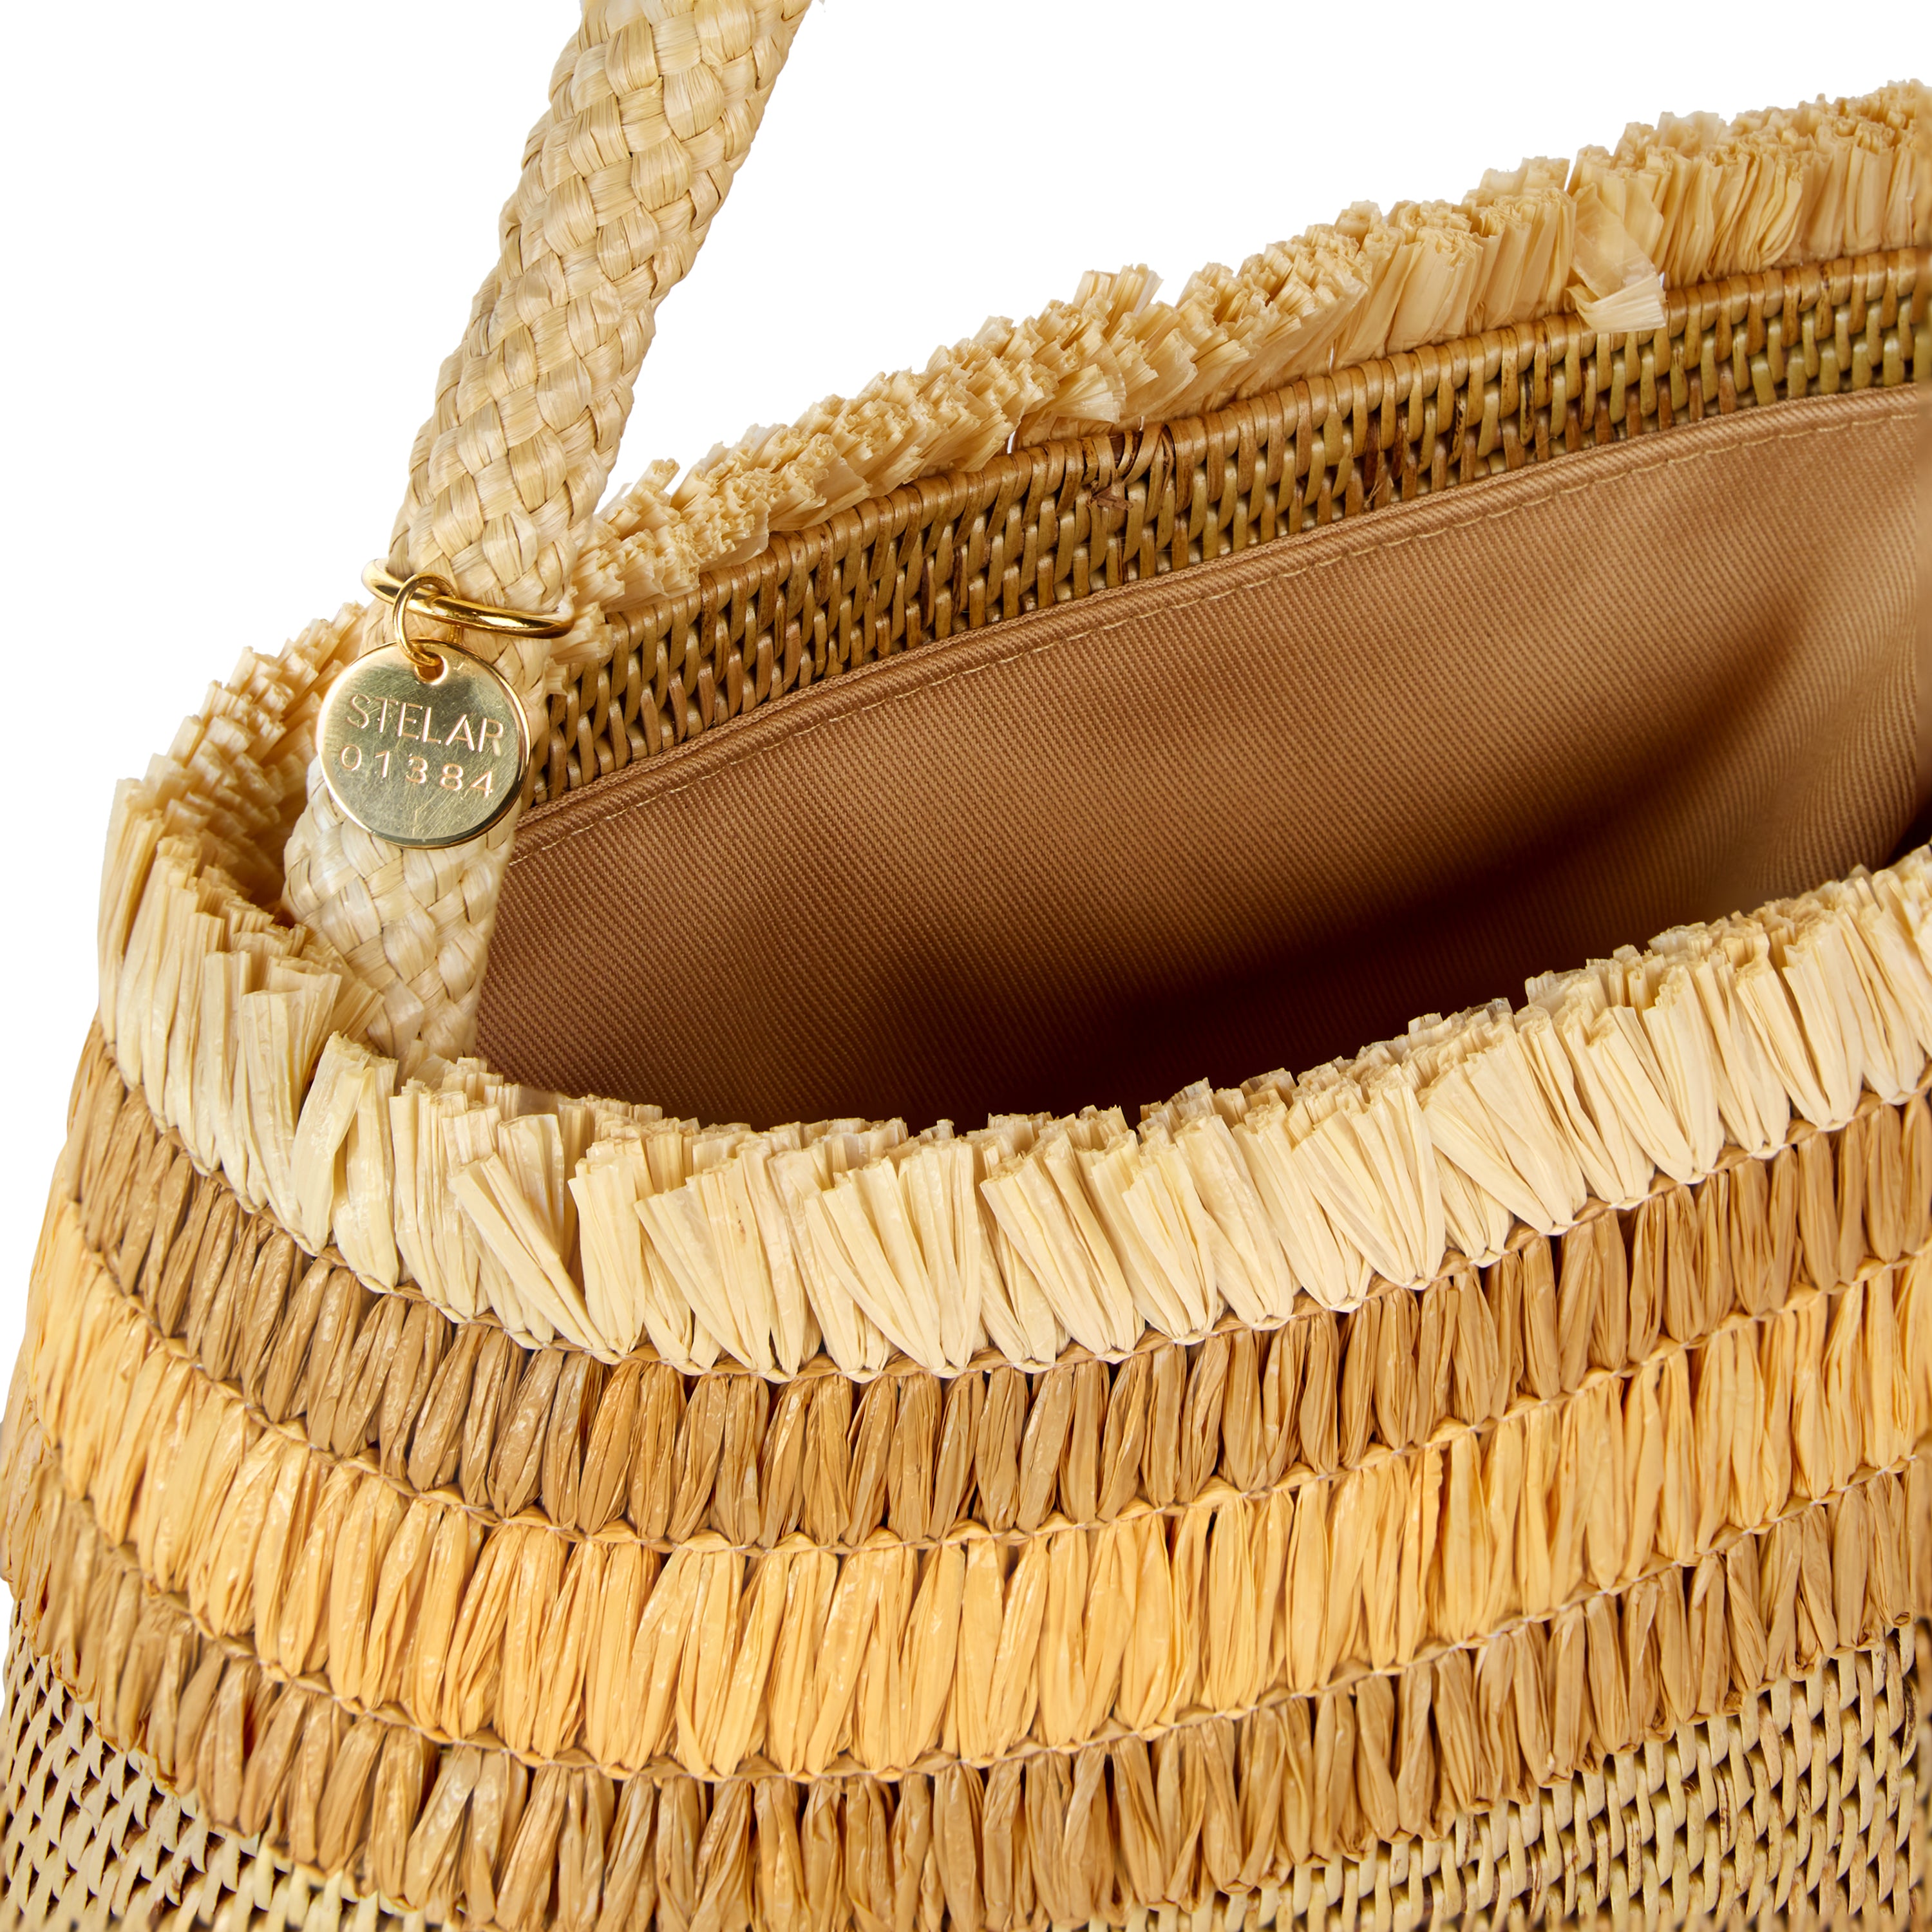 Raha Small Oval Bag in Natural with Beige Raffia by STELAR – This is Stelar